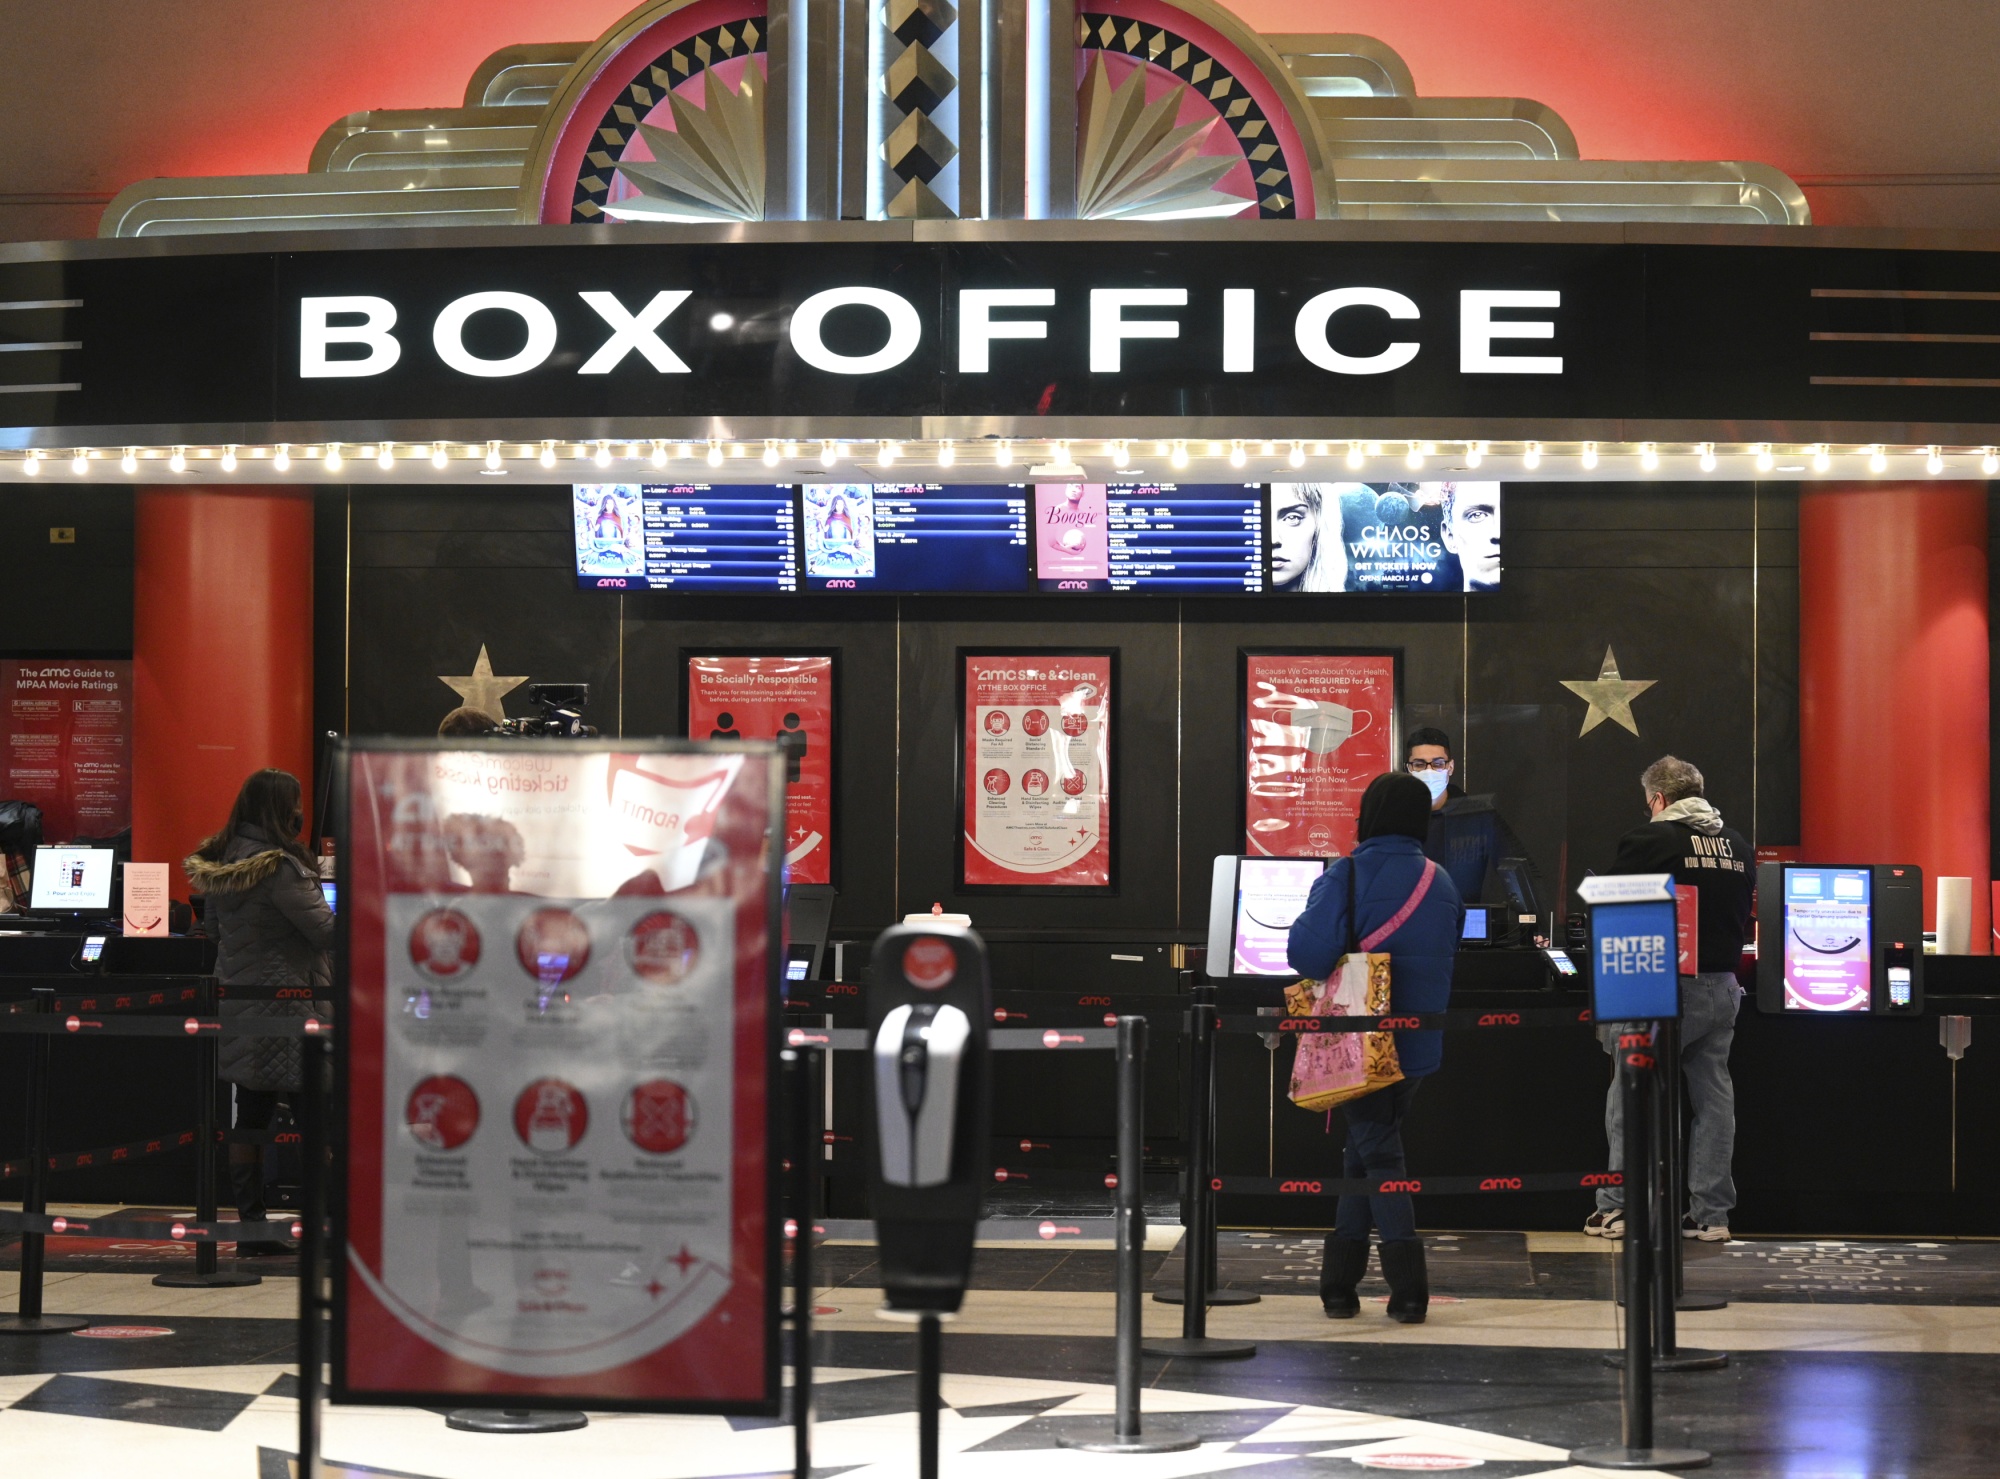  Coming to a Theater Near You: $3 Movie Tickets for National Cinema Day 